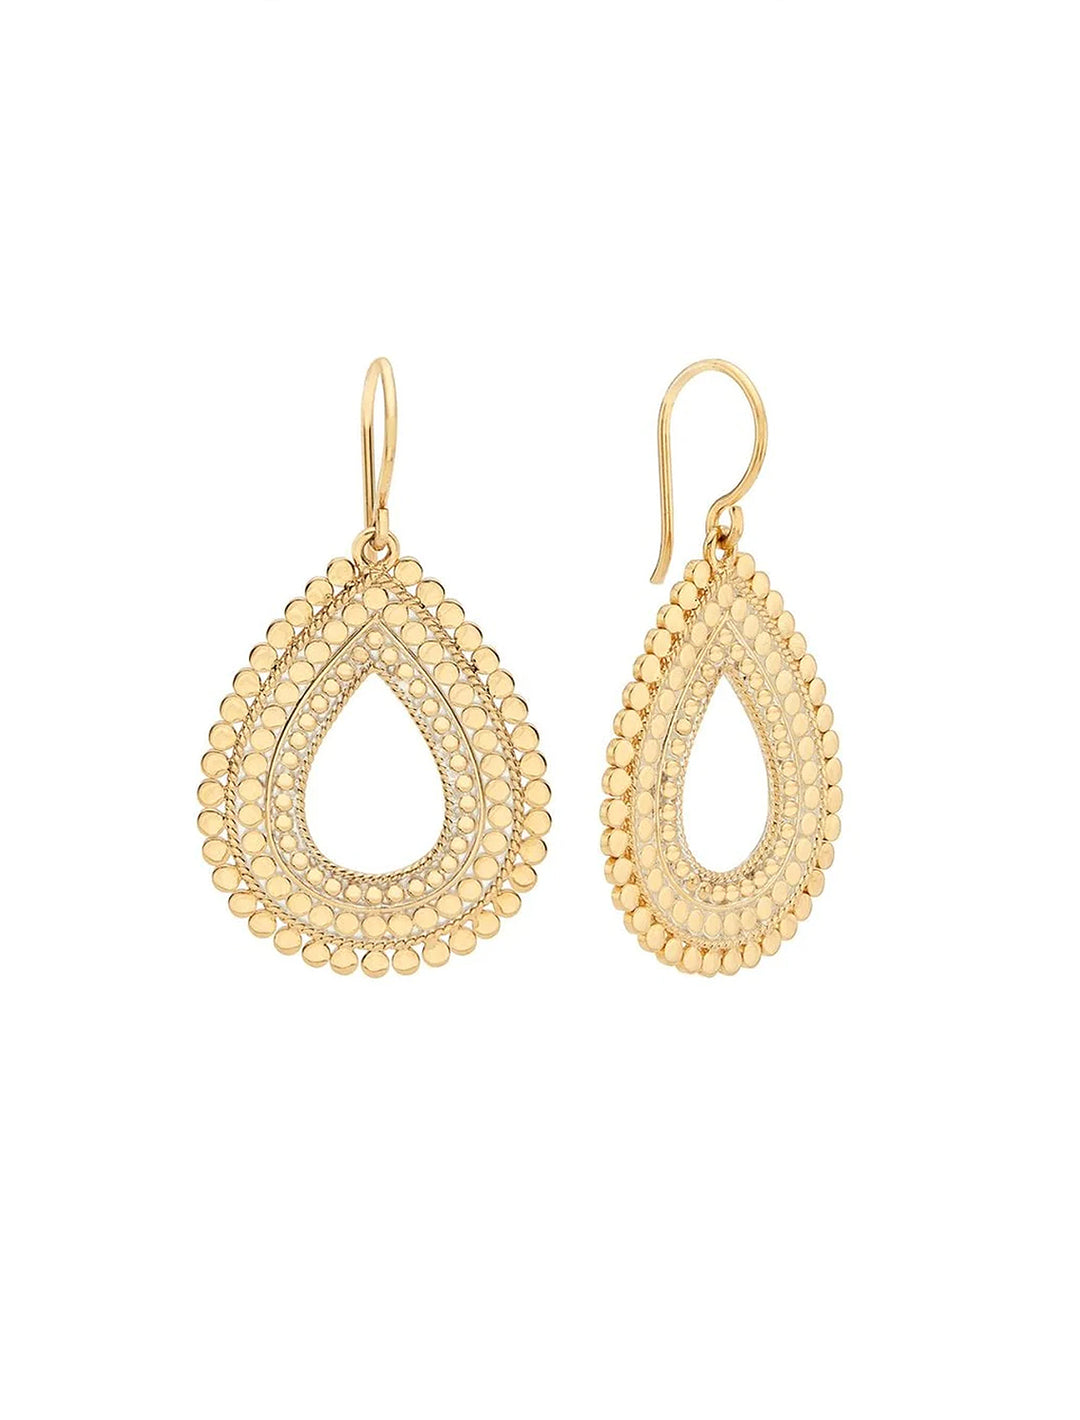 Front view of Anna Beck's large scalloped open drop earrings in gold.